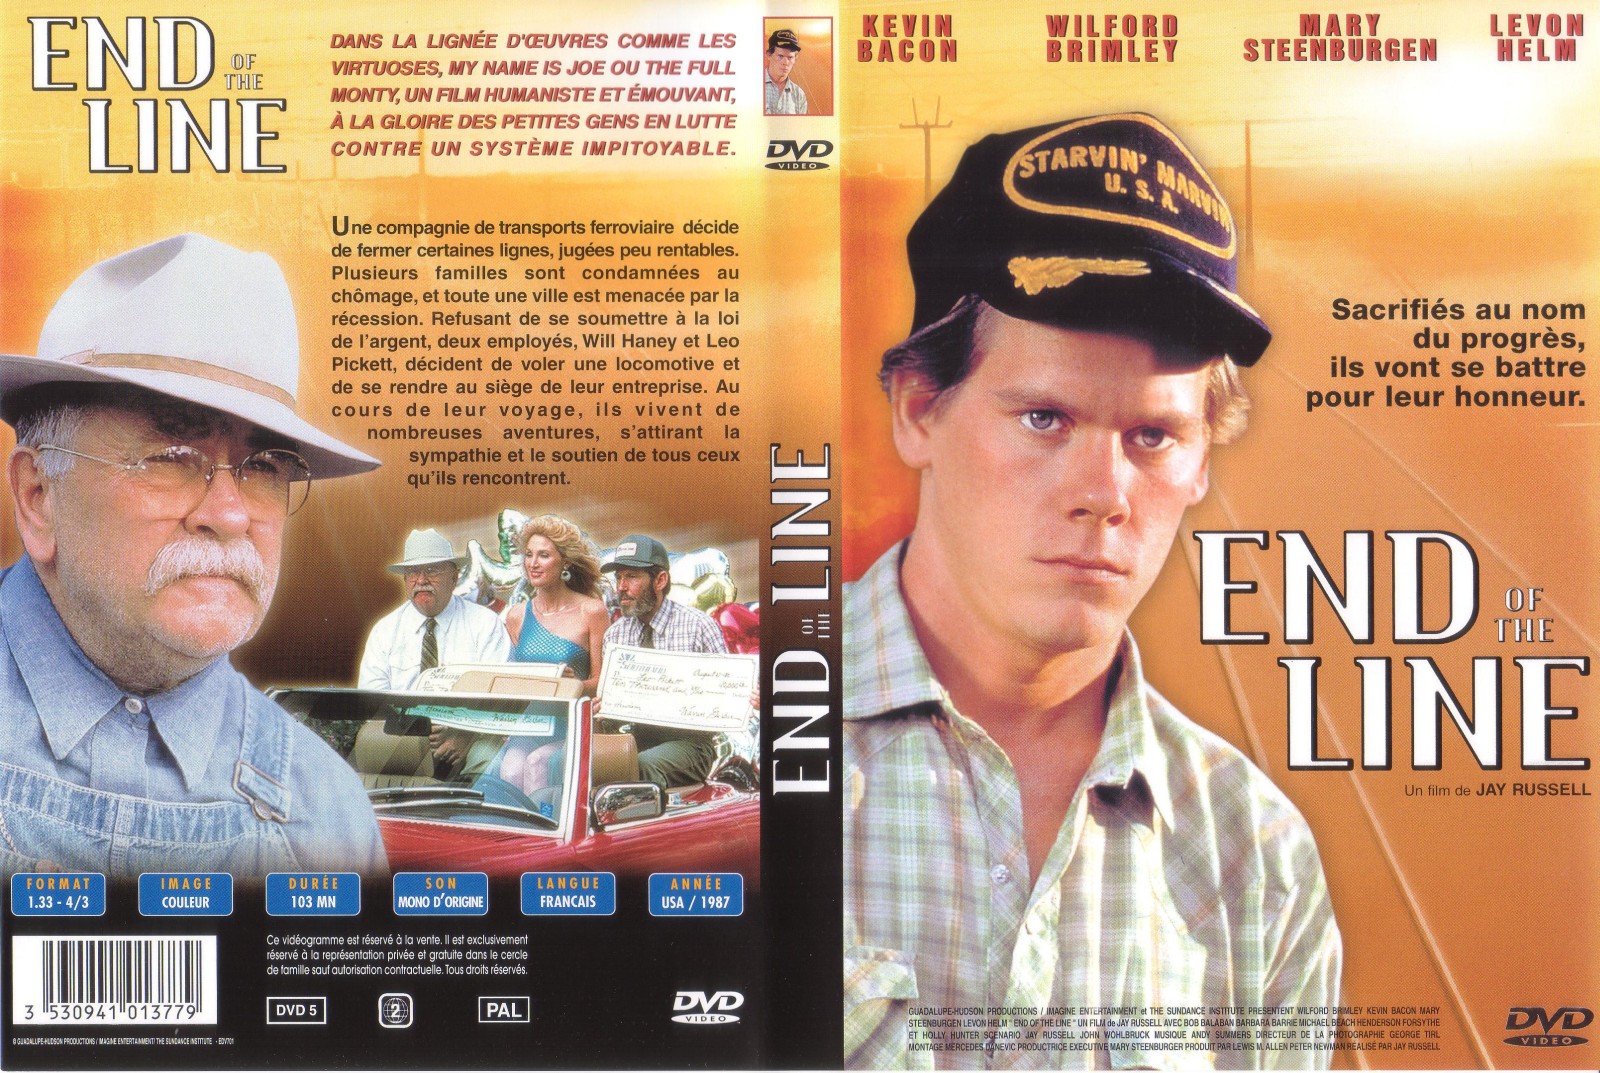 Jaquette DVD End of the line